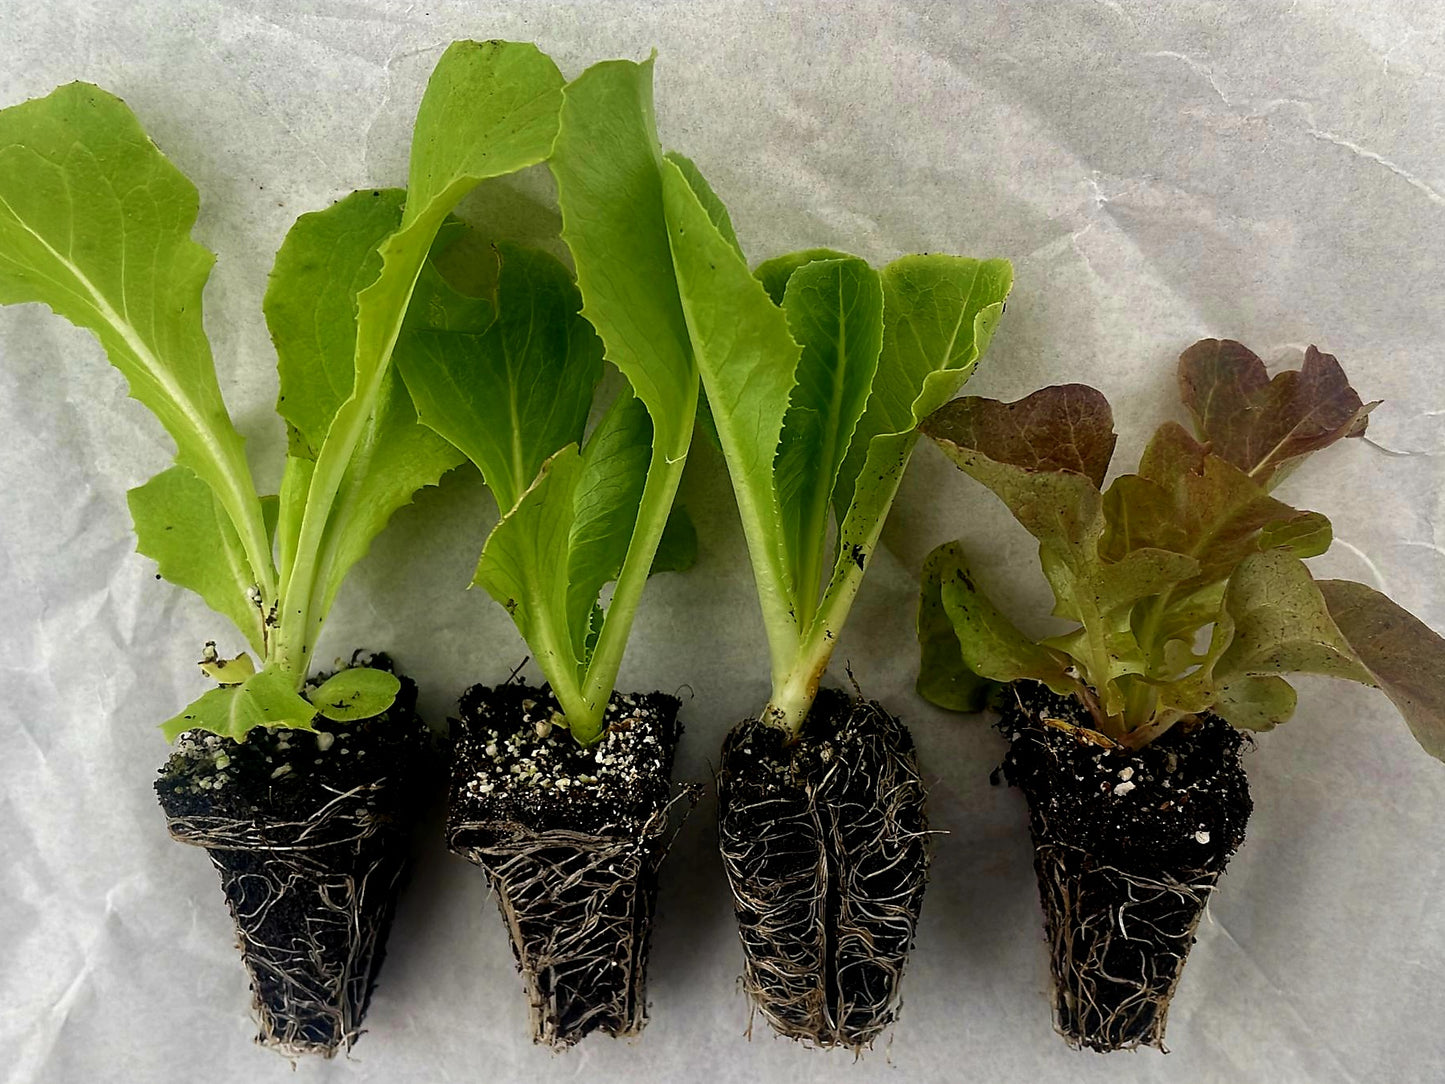 Weekly Subscription Box "Grow Your Own" Plug Plants Vegetables